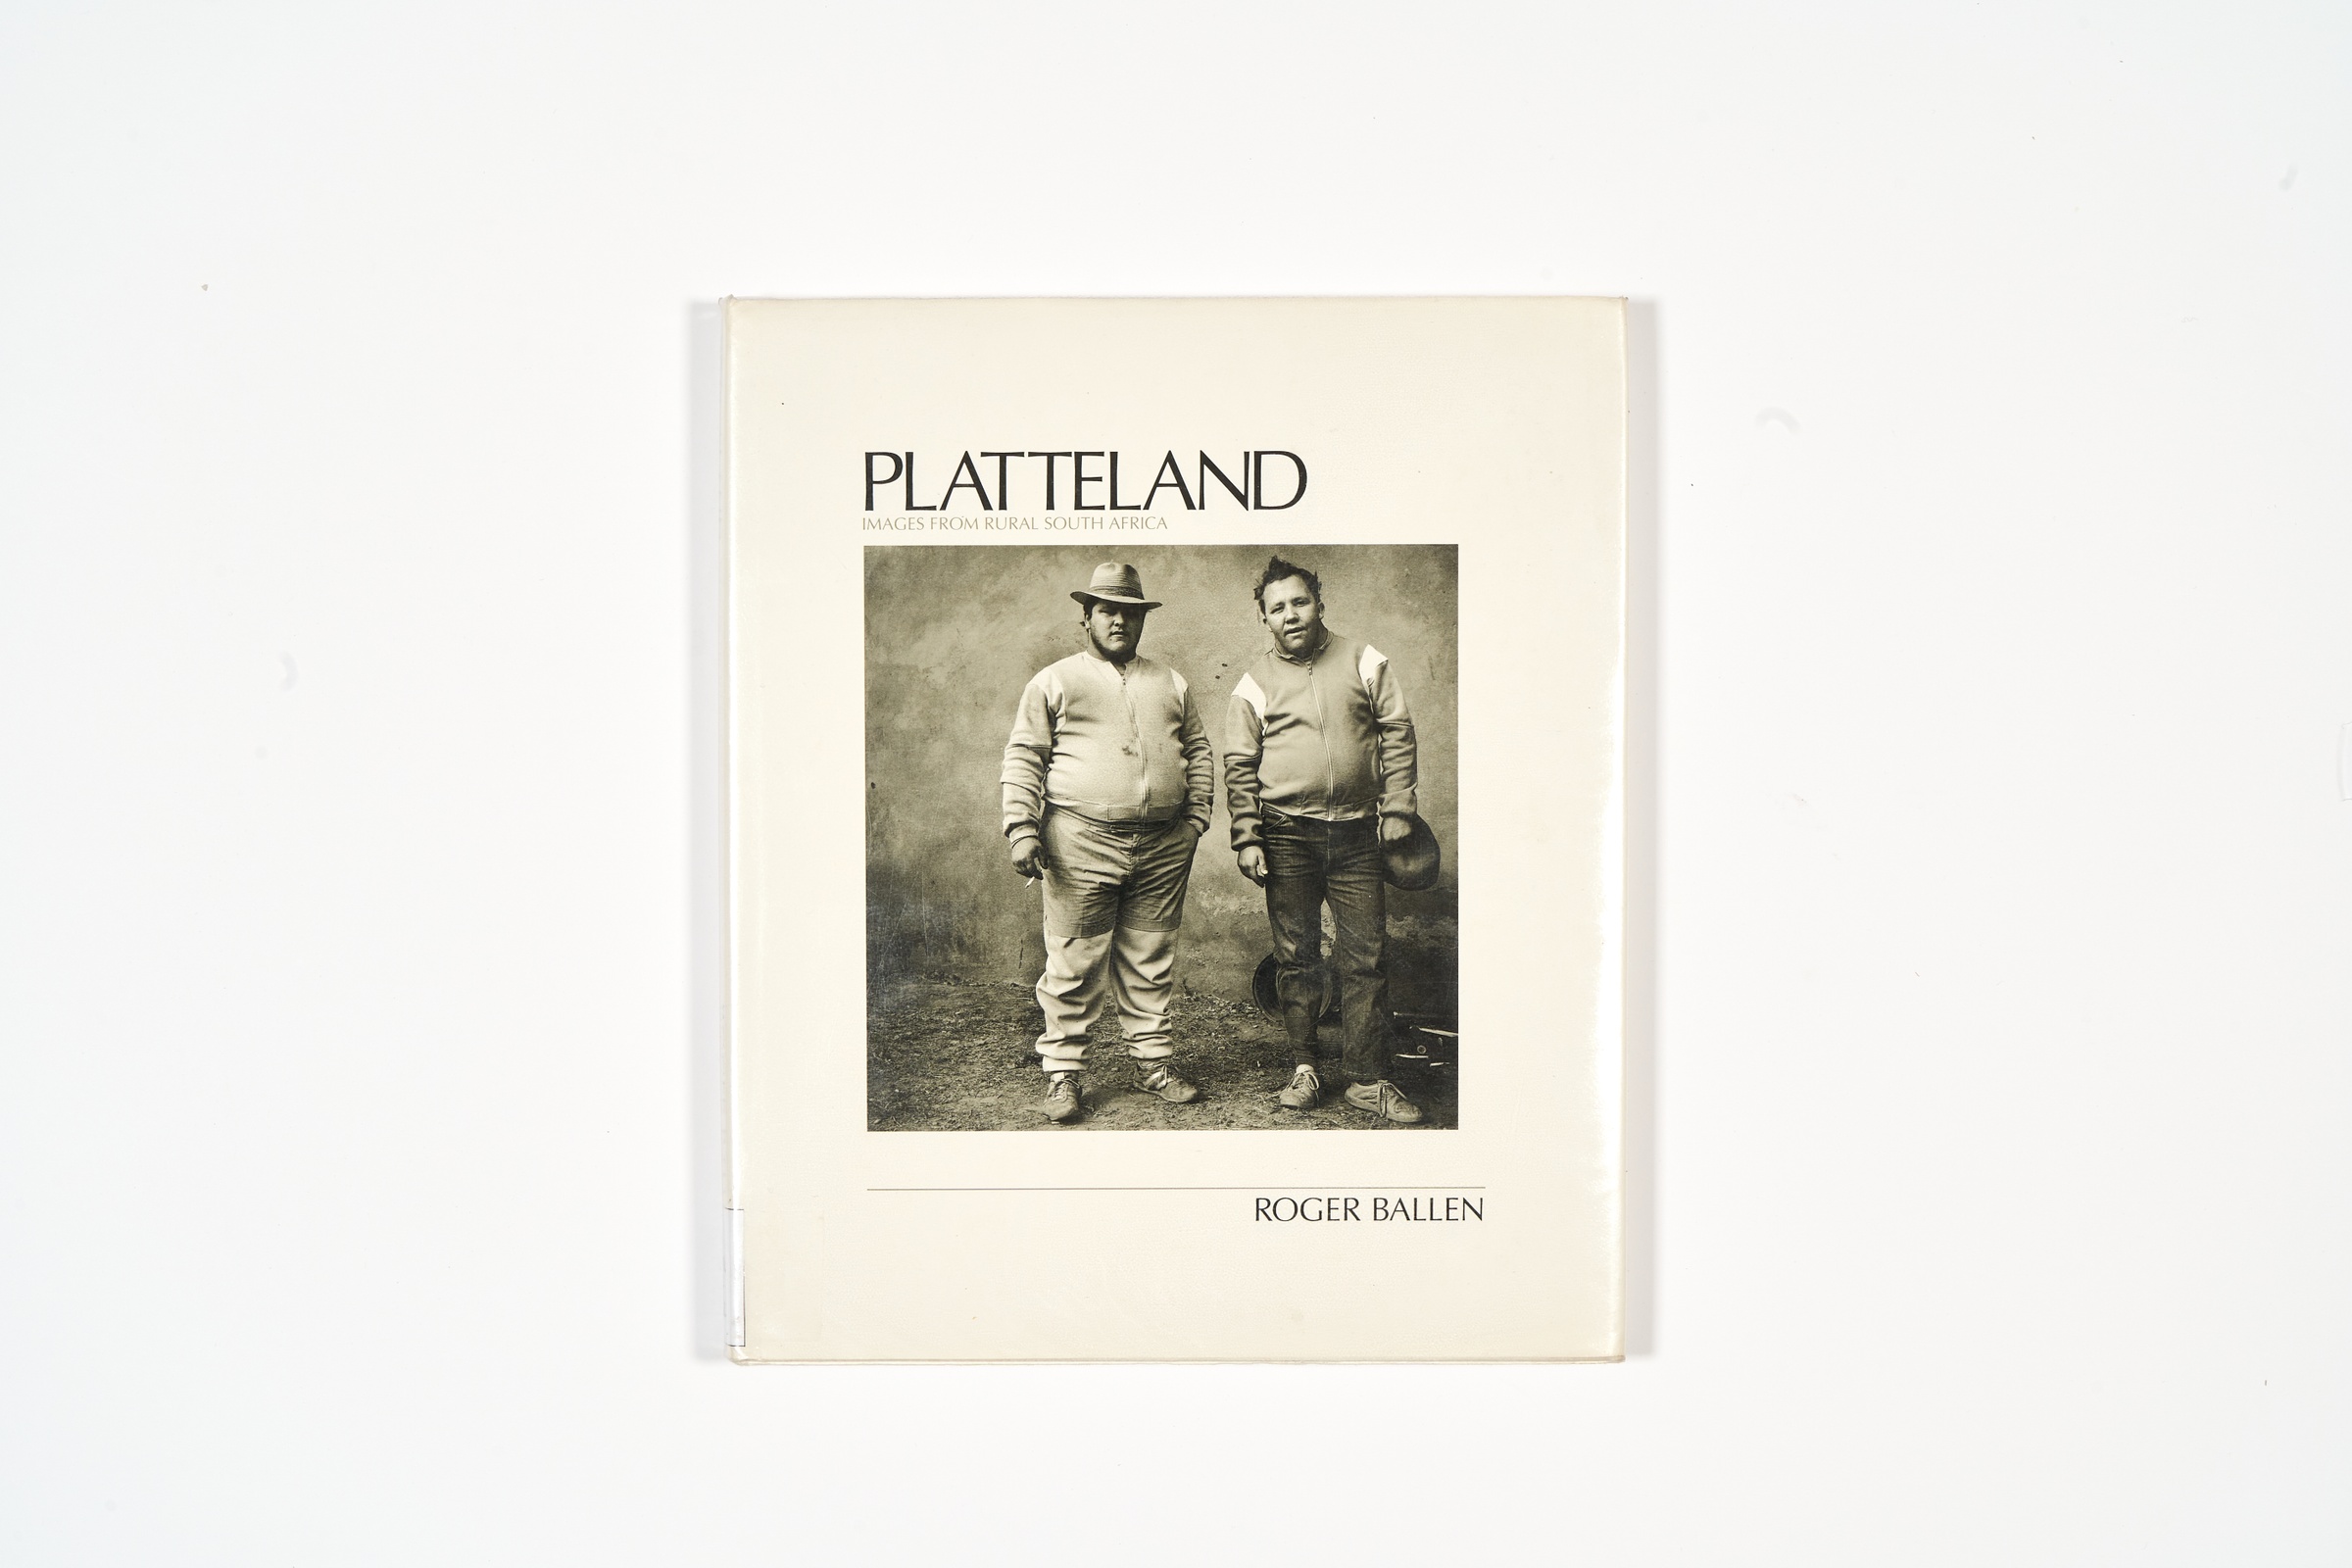 A topdown photograph of the cover of Roger Ballen's photo-book 'Platteland: Images from Rural South Africa' on a white background.
